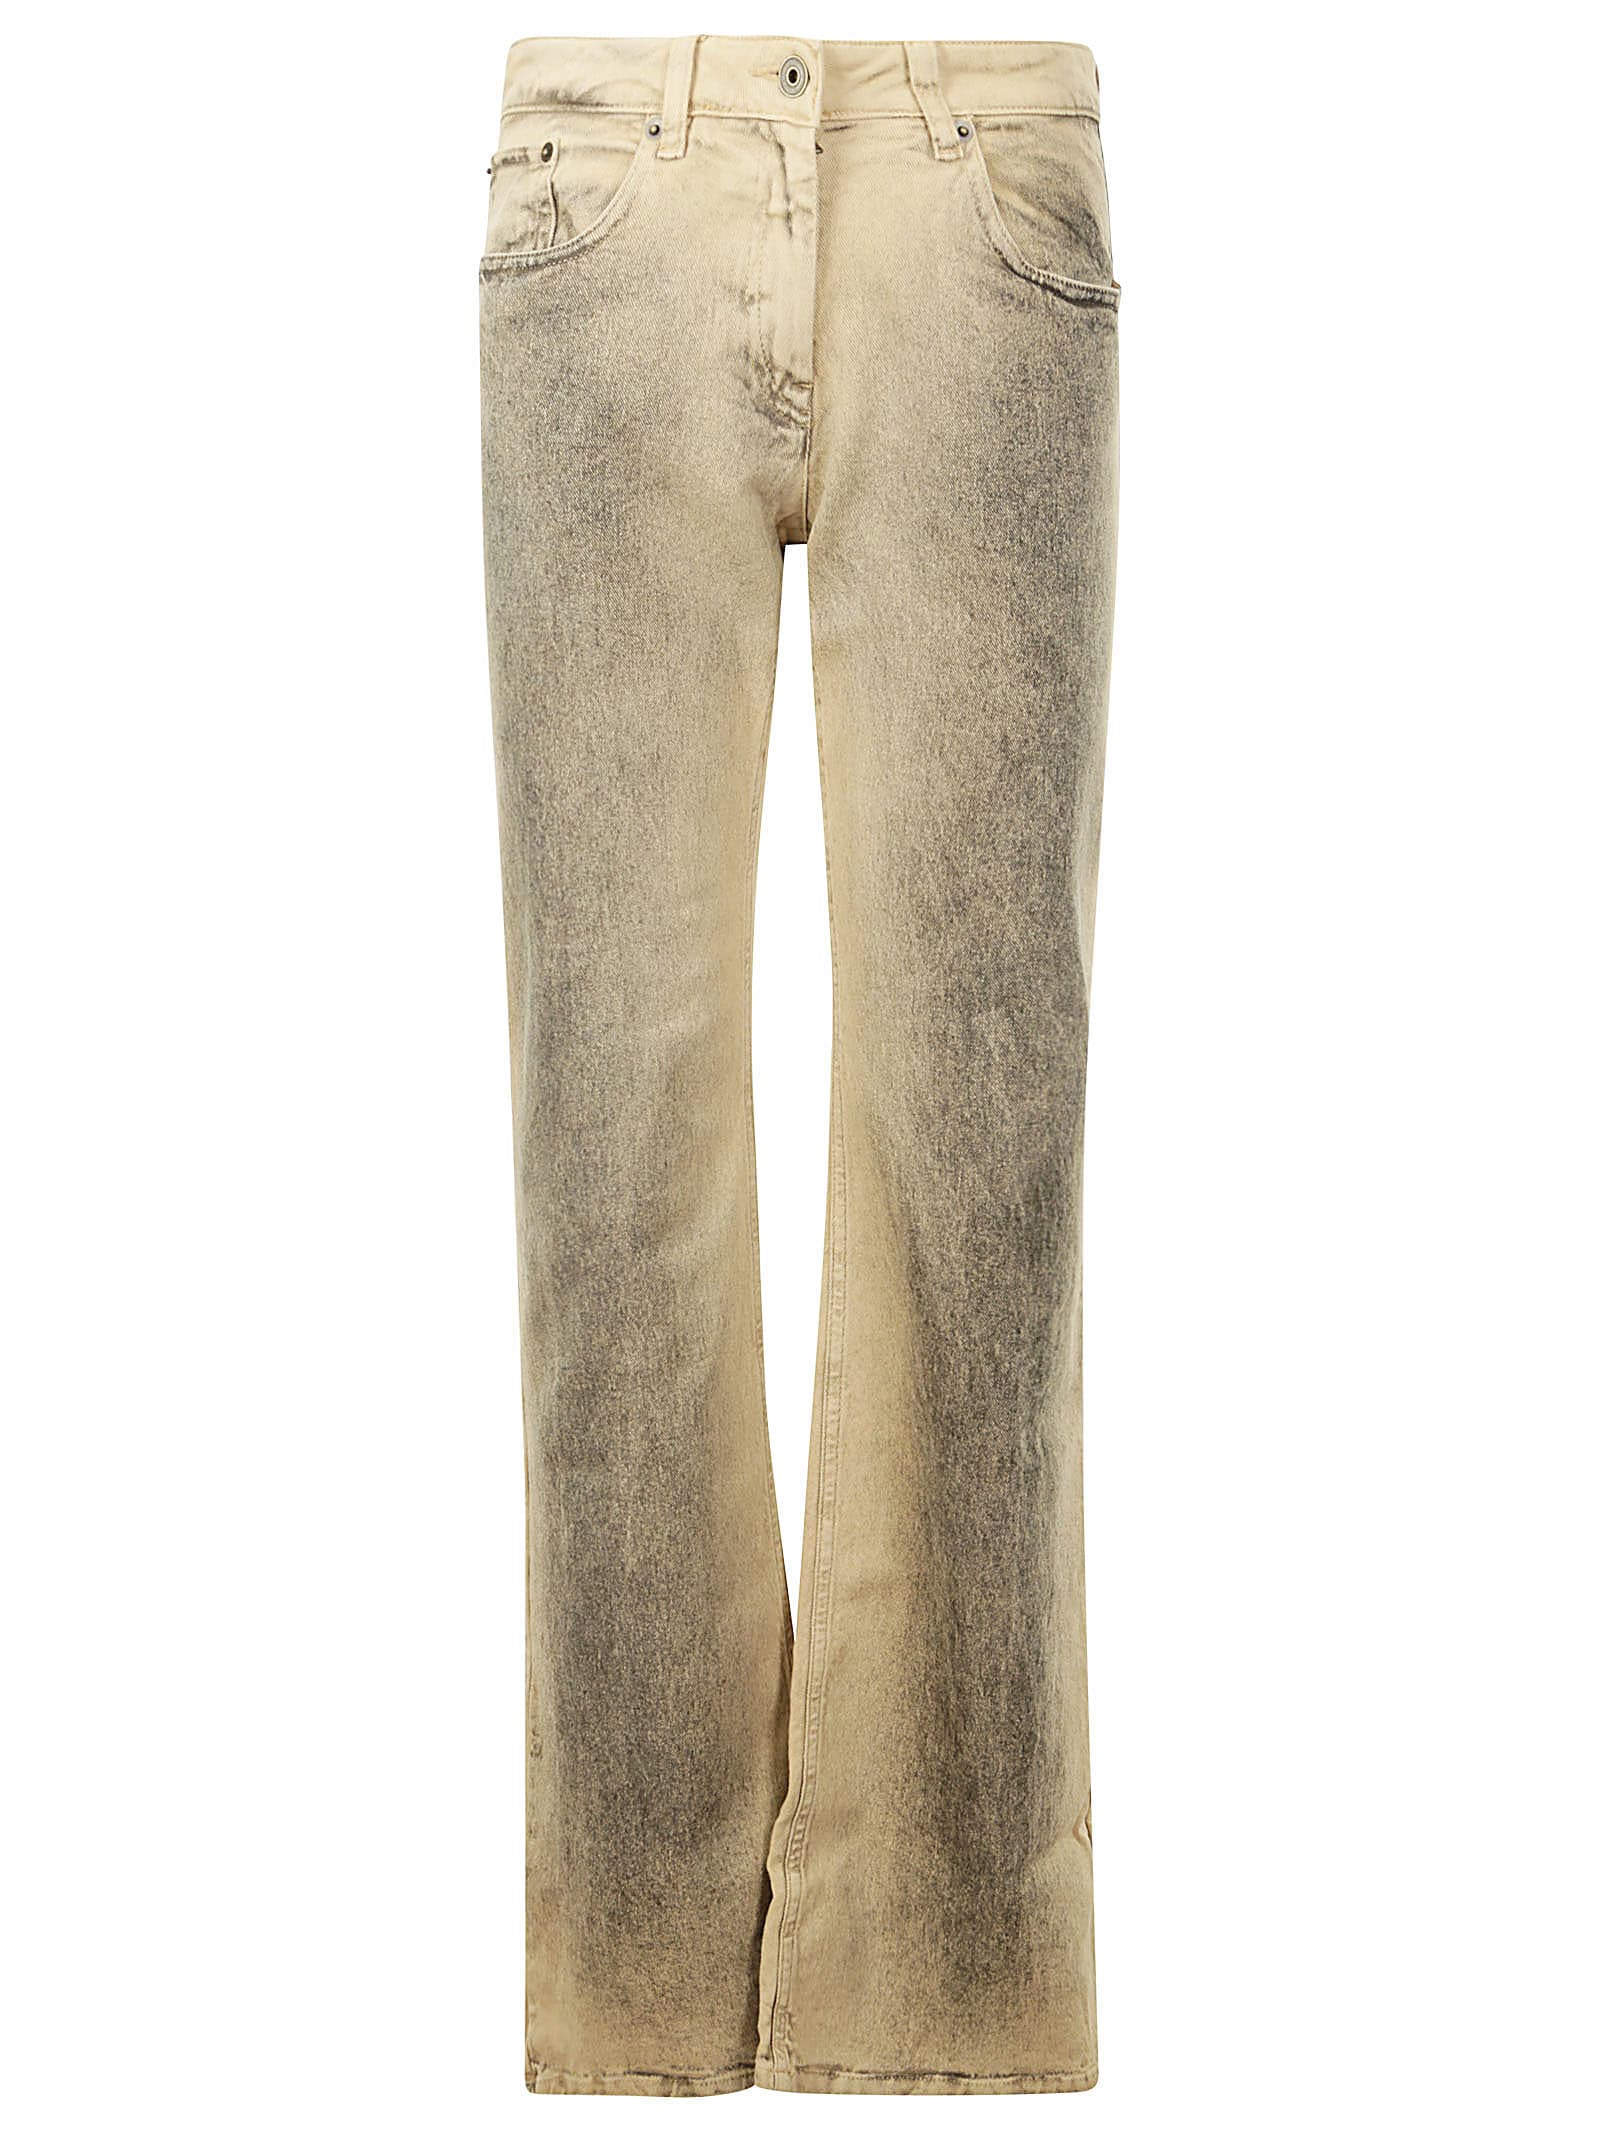 KNWLS Bootcut Washed Slim Denim Trousers With Leg Spray.